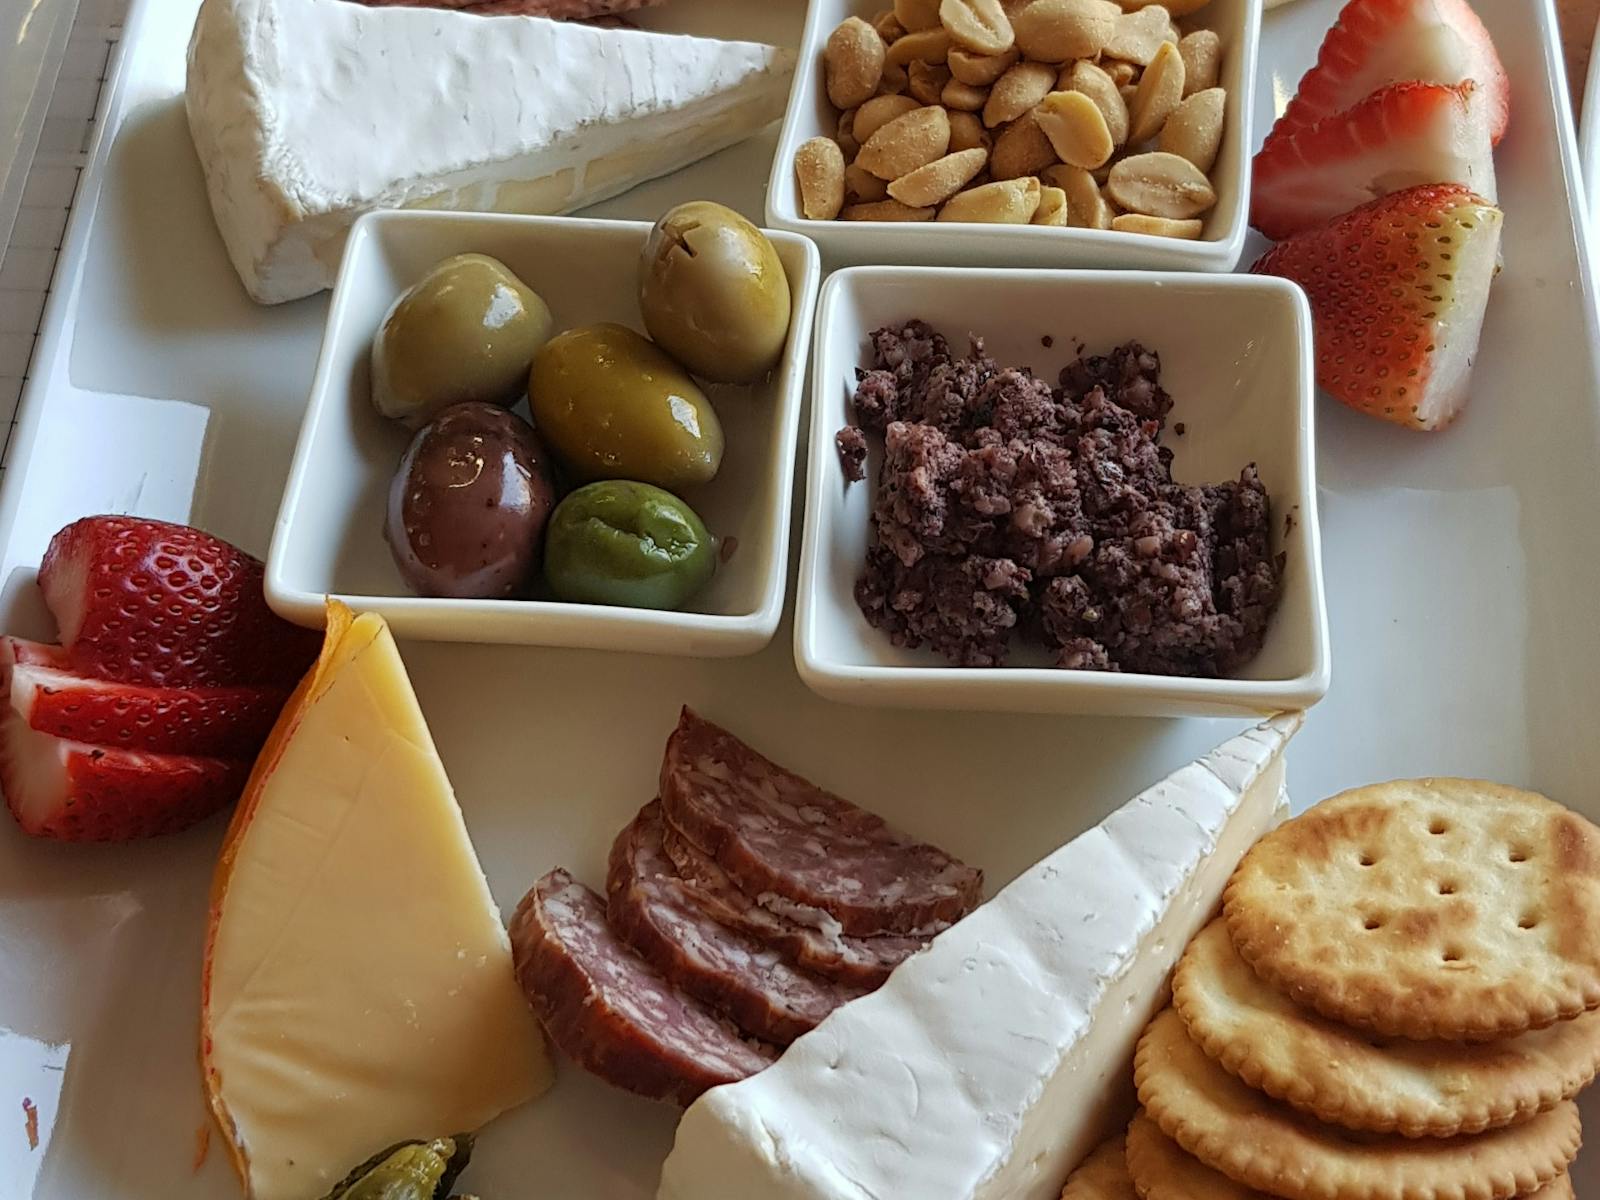 Sample our local delight platter with cheeses to compliment our wines